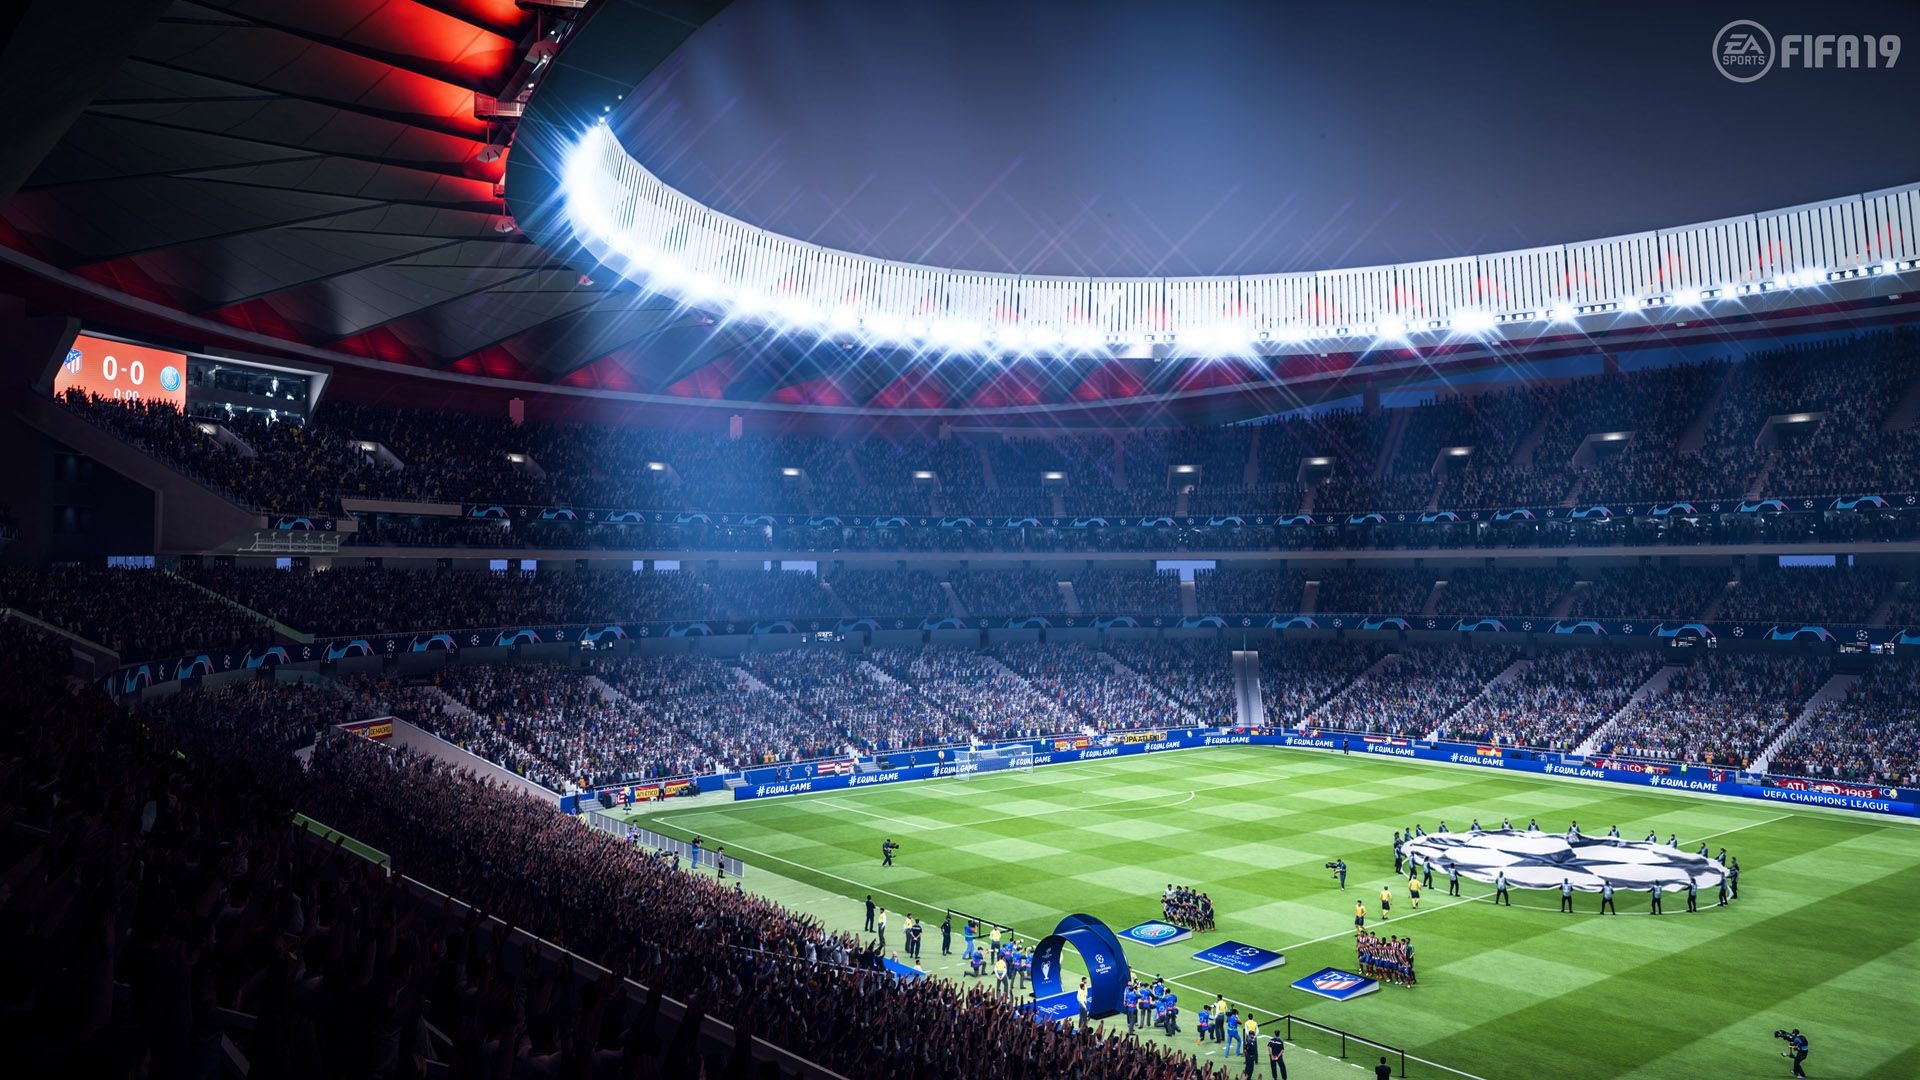 FIFA 19 review Journeys end image 10